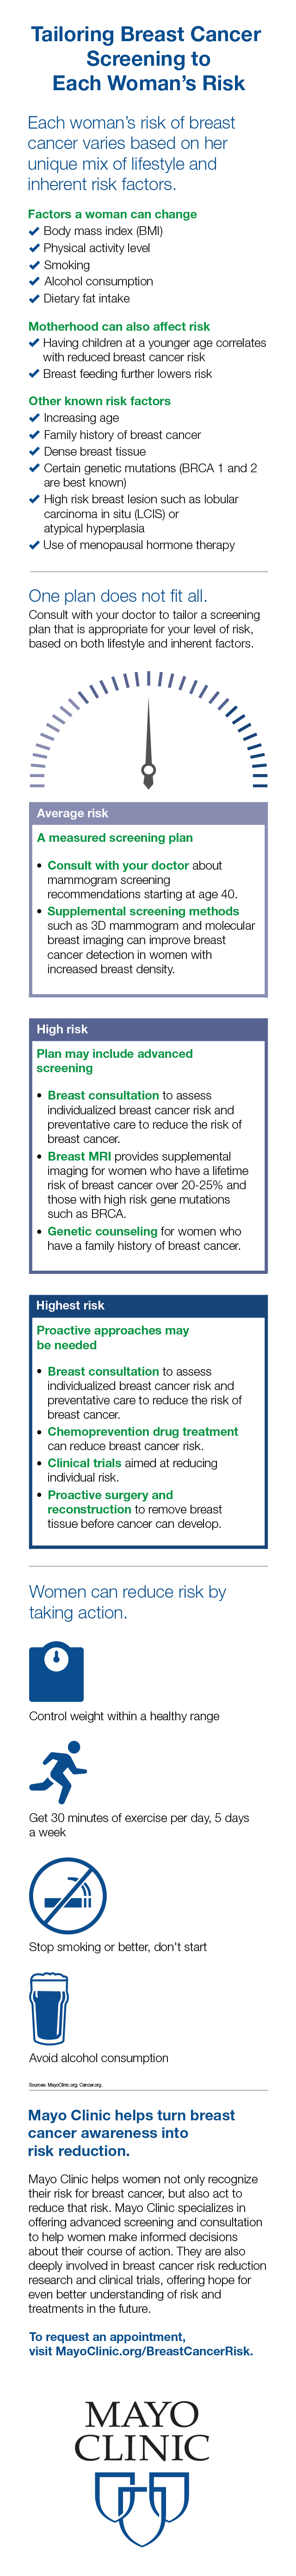 medical infographic for breast cancer risk and treatment